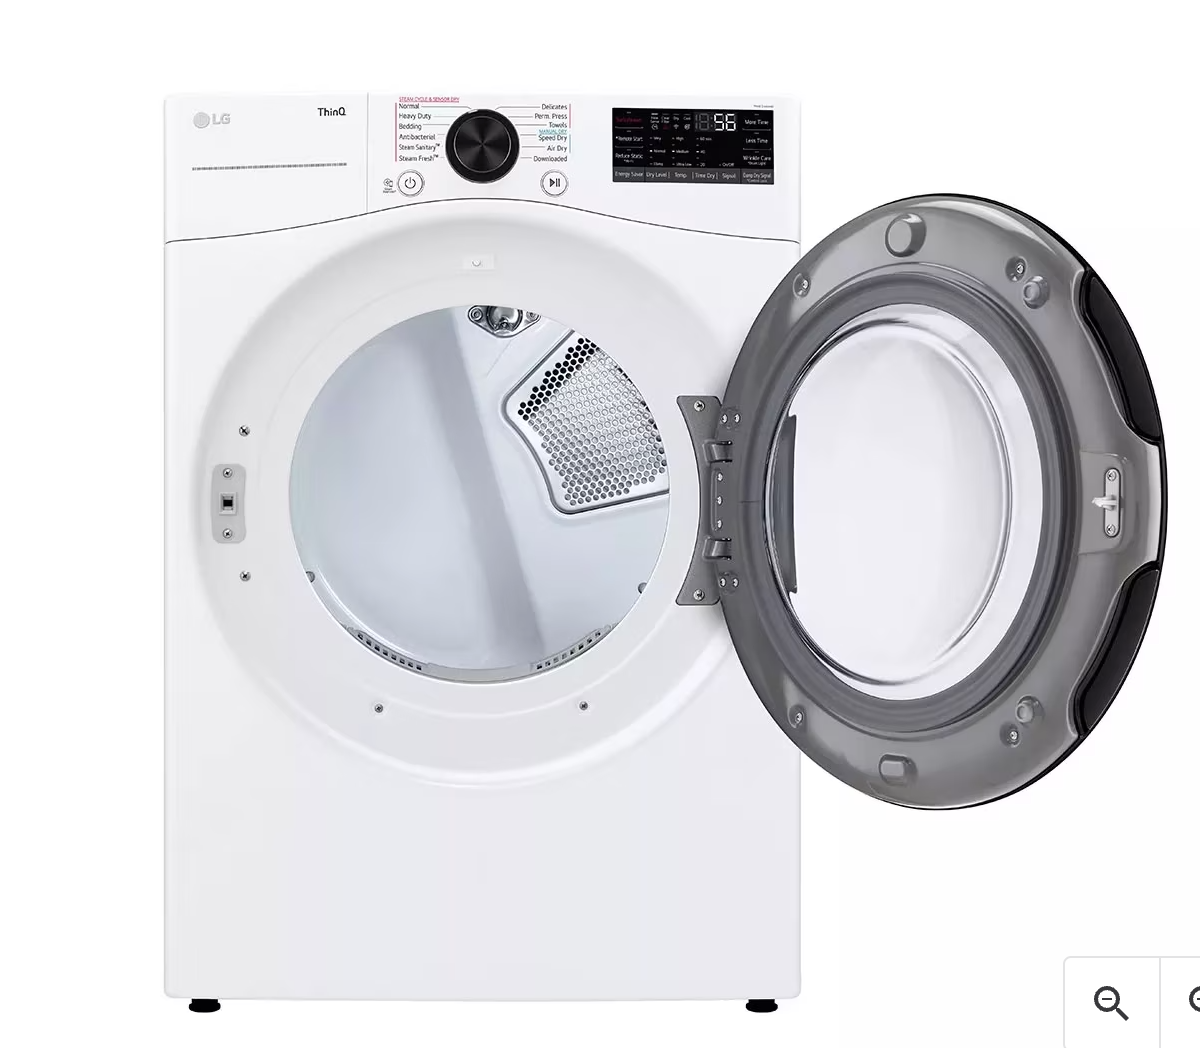 LG Large Capacity 7.4 Cu. Ft. New Gas Dryer In White With Sensor Dry And Steam Technology, Energy Star.